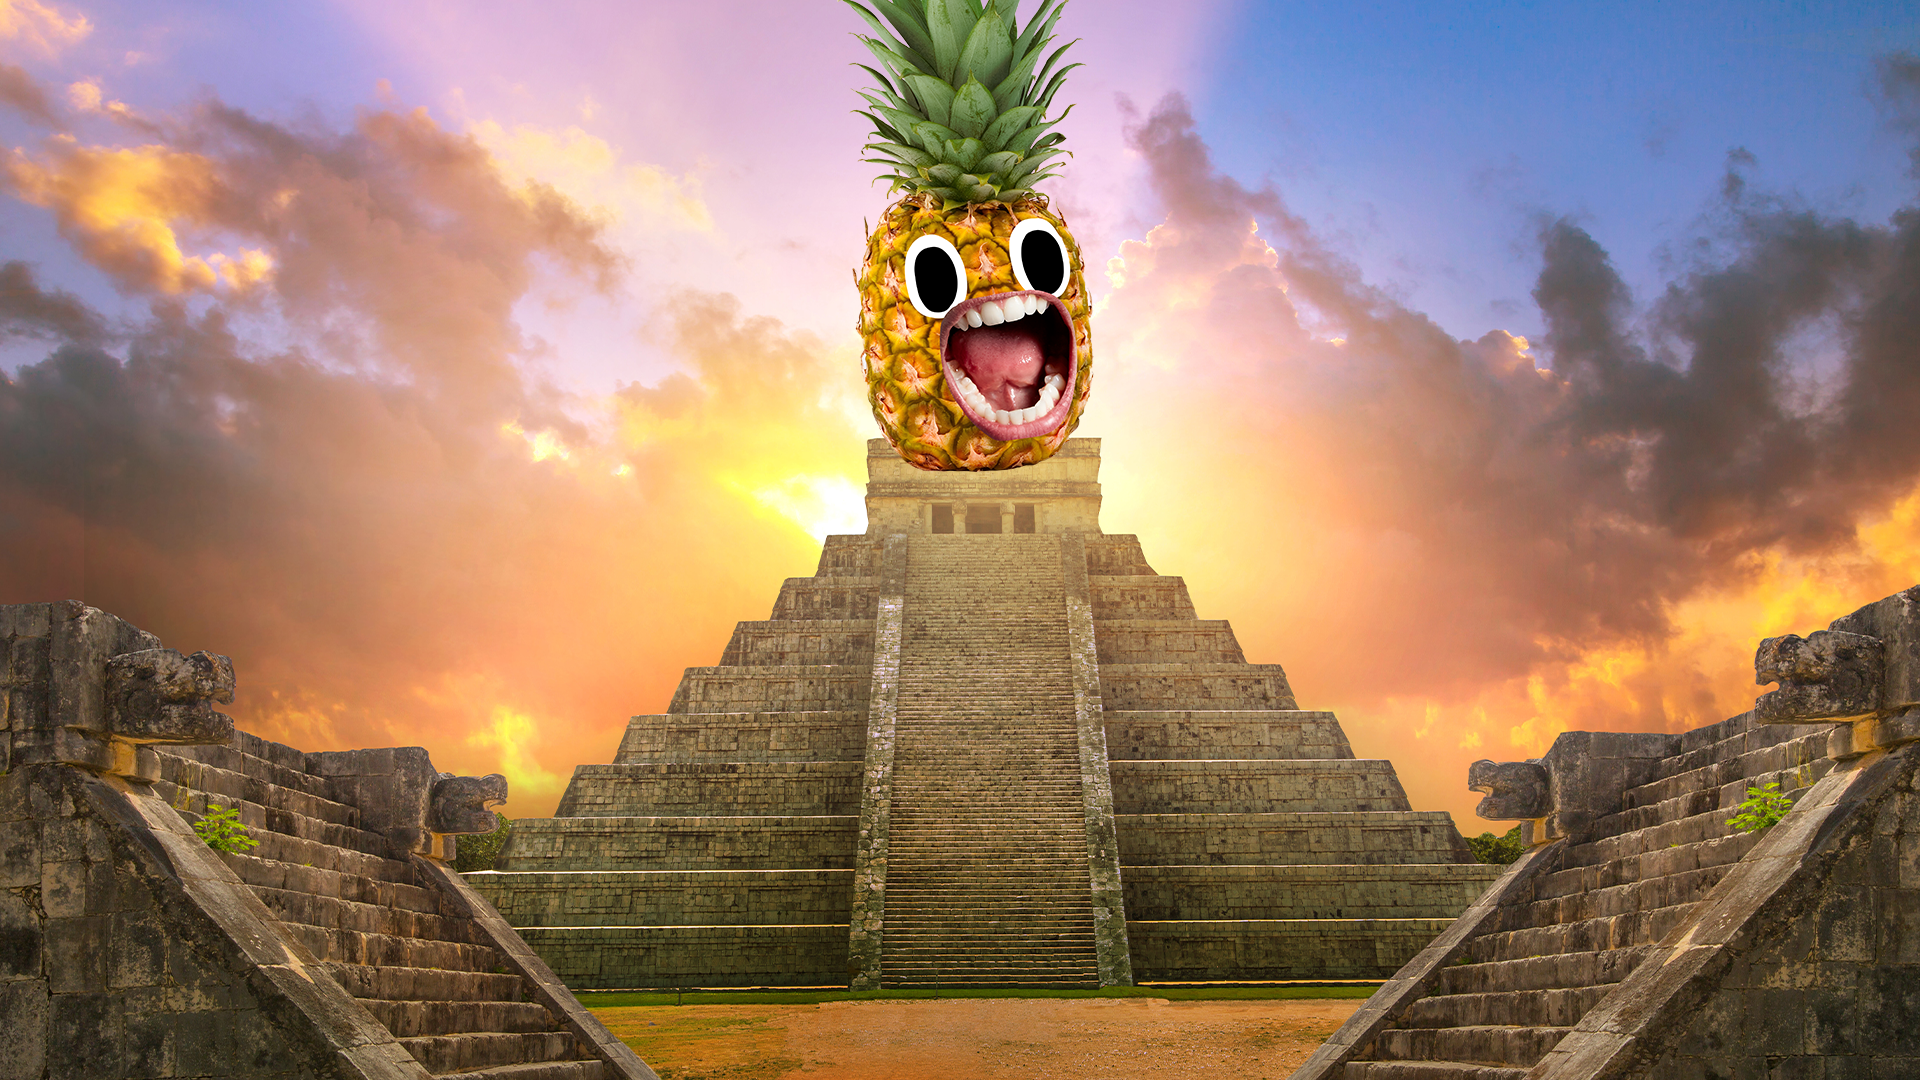 Screaming pineapple on top of Aztec temple